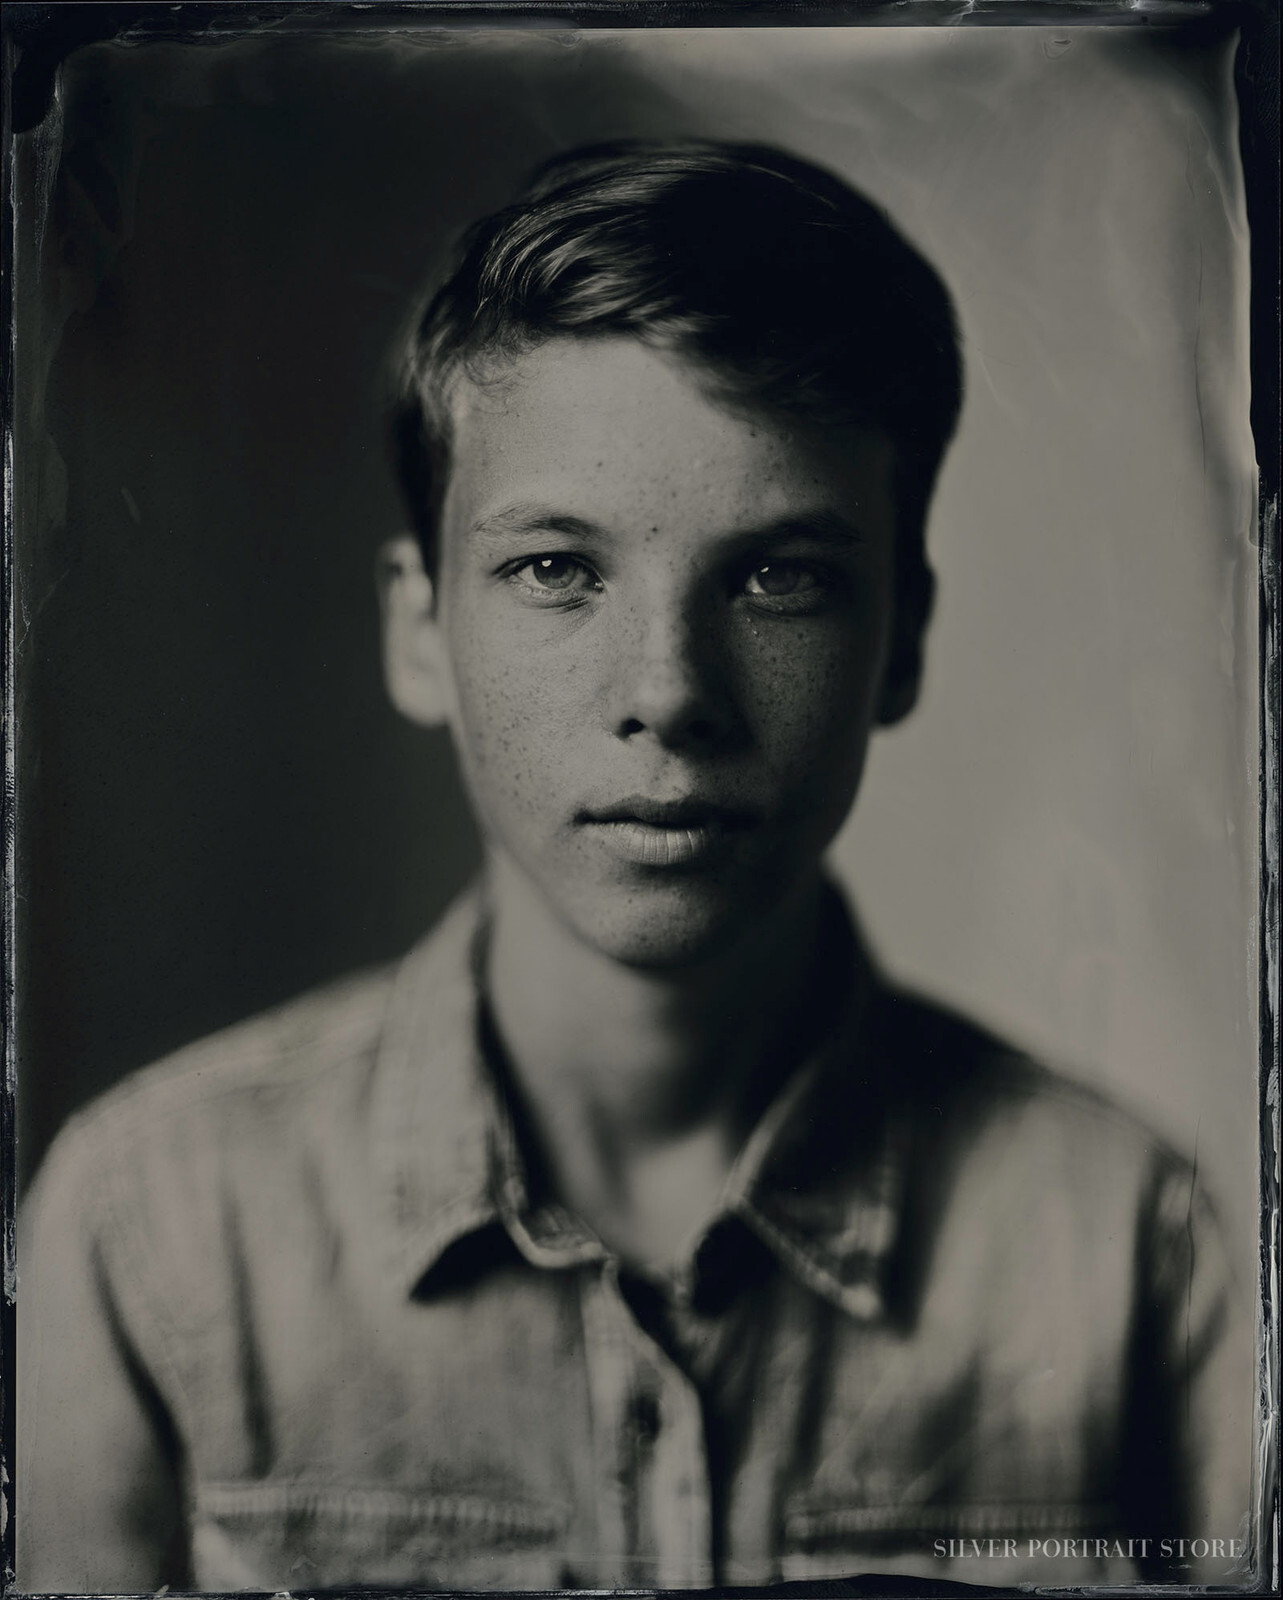 Jonas-Silver Portrait Store-Scan from Wet plate collodion-Tintype 20 x 25 cm